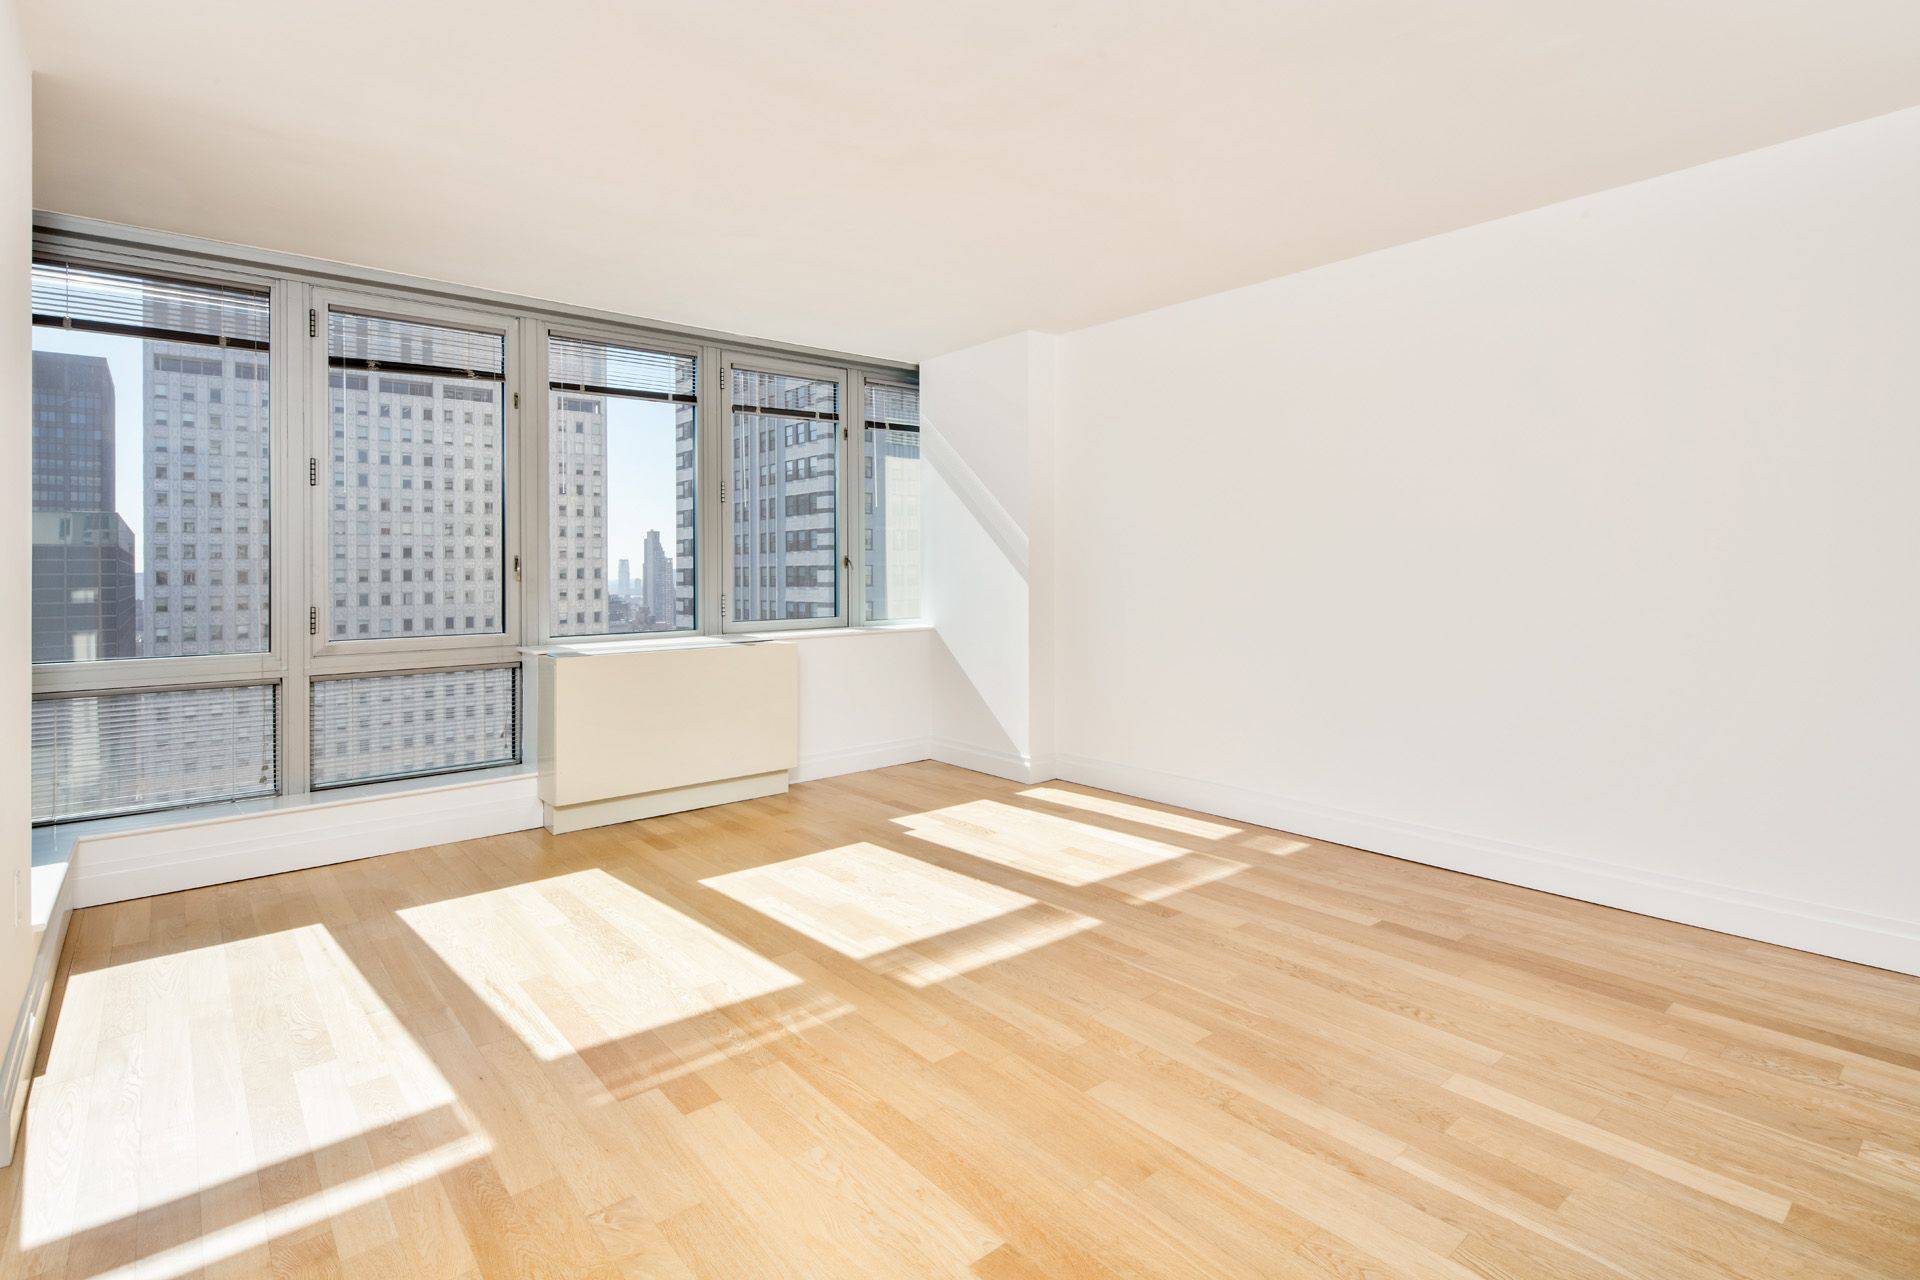 This breathtaking STUDIO 1BA opens up into a true loft like living area with open city views to the south and east and floor to ceiling double paned windows.